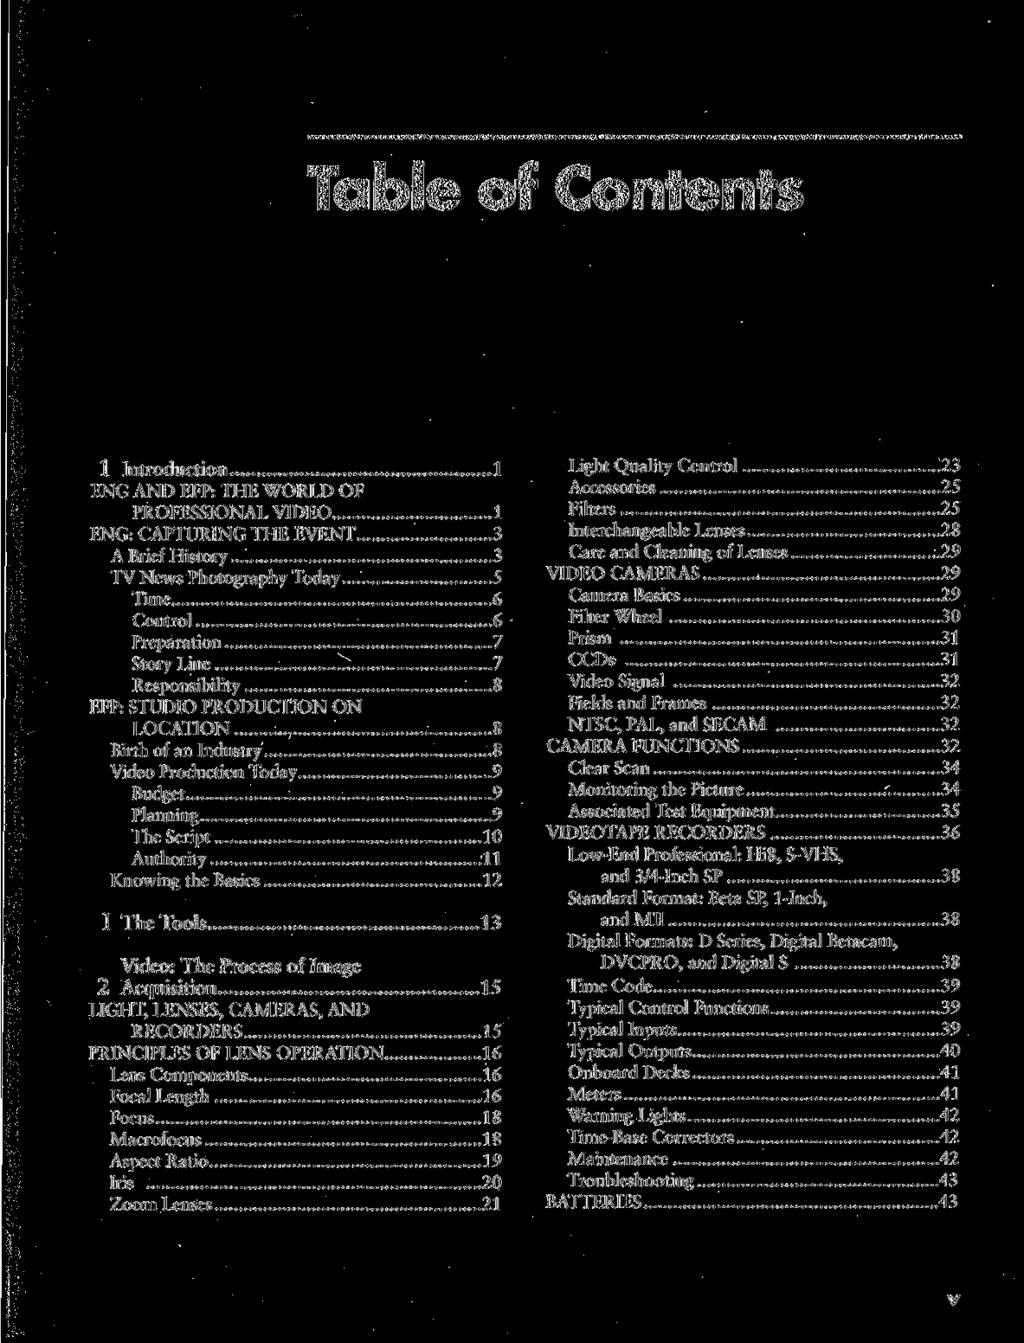 Table of Contents 1 Introduction 1 ENG AND EFP: THE WORLD OF PROFESSIONAL VIDEO 1 ENG: CAPTURING THE EVENT 3 A Brief History 3 TV News Photography Today 5 Time 6 Control 6 Preparation 7 Story Line 7